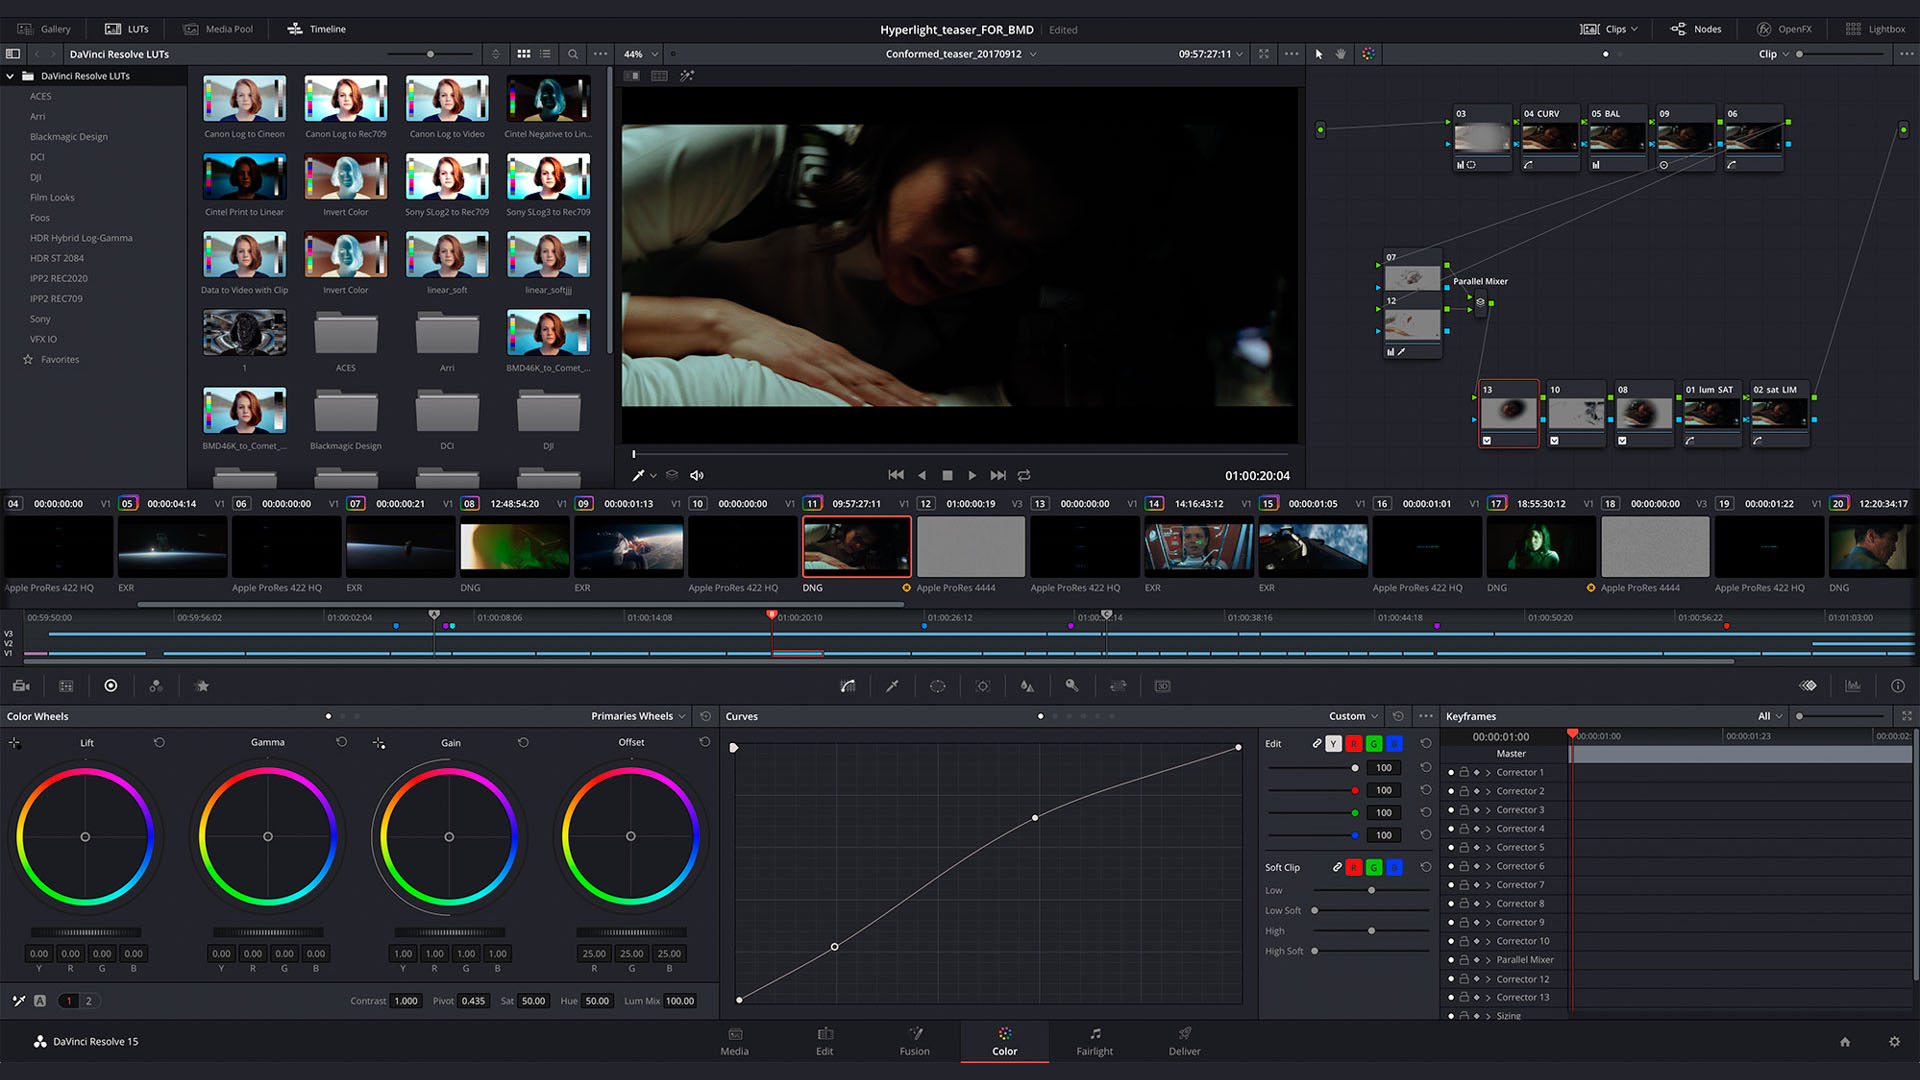 DaVinci Resolve Tip: Using a Color Chart to Match Your Shots